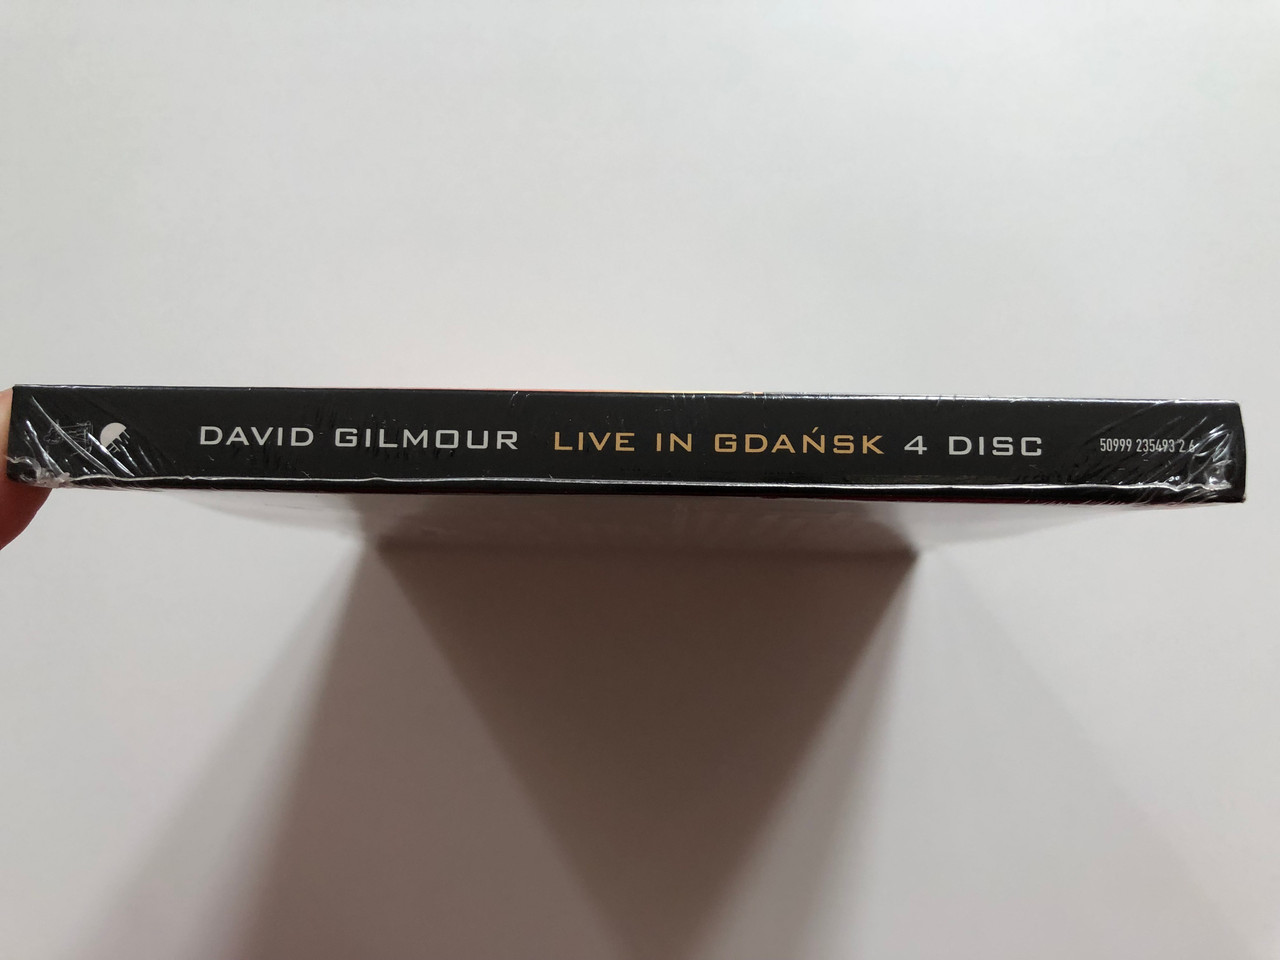 https://cdn10.bigcommerce.com/s-62bdpkt7pb/products/0/images/207969/David_Gilmour_Live_In_Gdask_4_Disc_Edition_Live_In_The_Gdask_Shipyard_With_The_Baltic_Philharmonic_Symphony_Orchestra_in_Gdask_EMI_2x_Audio_CD_2x_DVD_CD_2008_50999_235493_2_6_3__47496.1642580128.1280.1280.JPG?c=2&_gl=1*1w4i3ks*_ga*MjA2NTIxMjE2MC4xNTkwNTEyNTMy*_ga_WS2VZYPC6G*MTY0MjU2ODQxNC4yNjYuMS4xNjQyNTgwMTM0LjYw